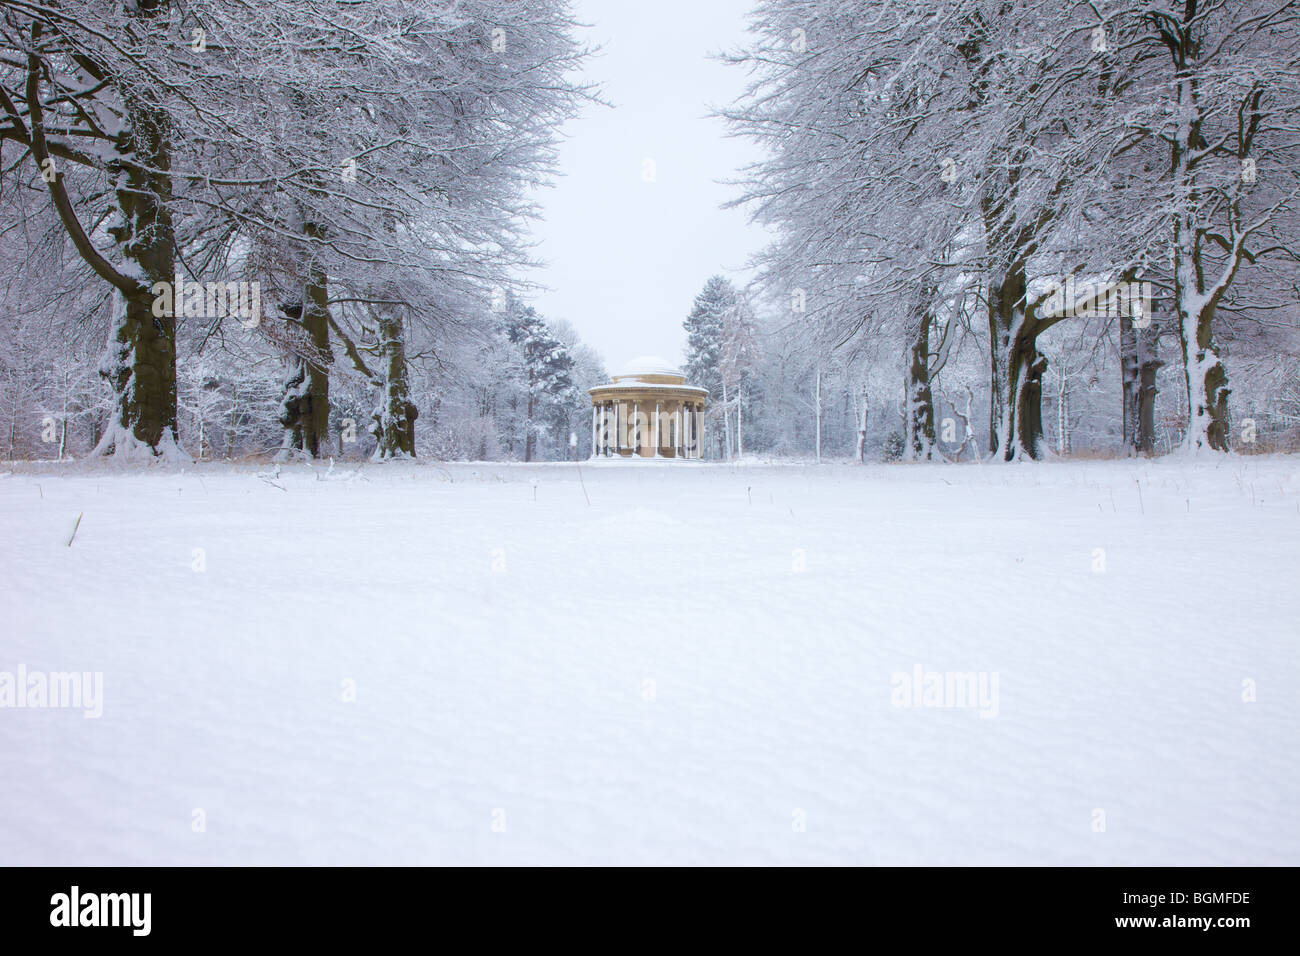 The Temple building in Bramham Park Estate after heavy snow. Stock Photo